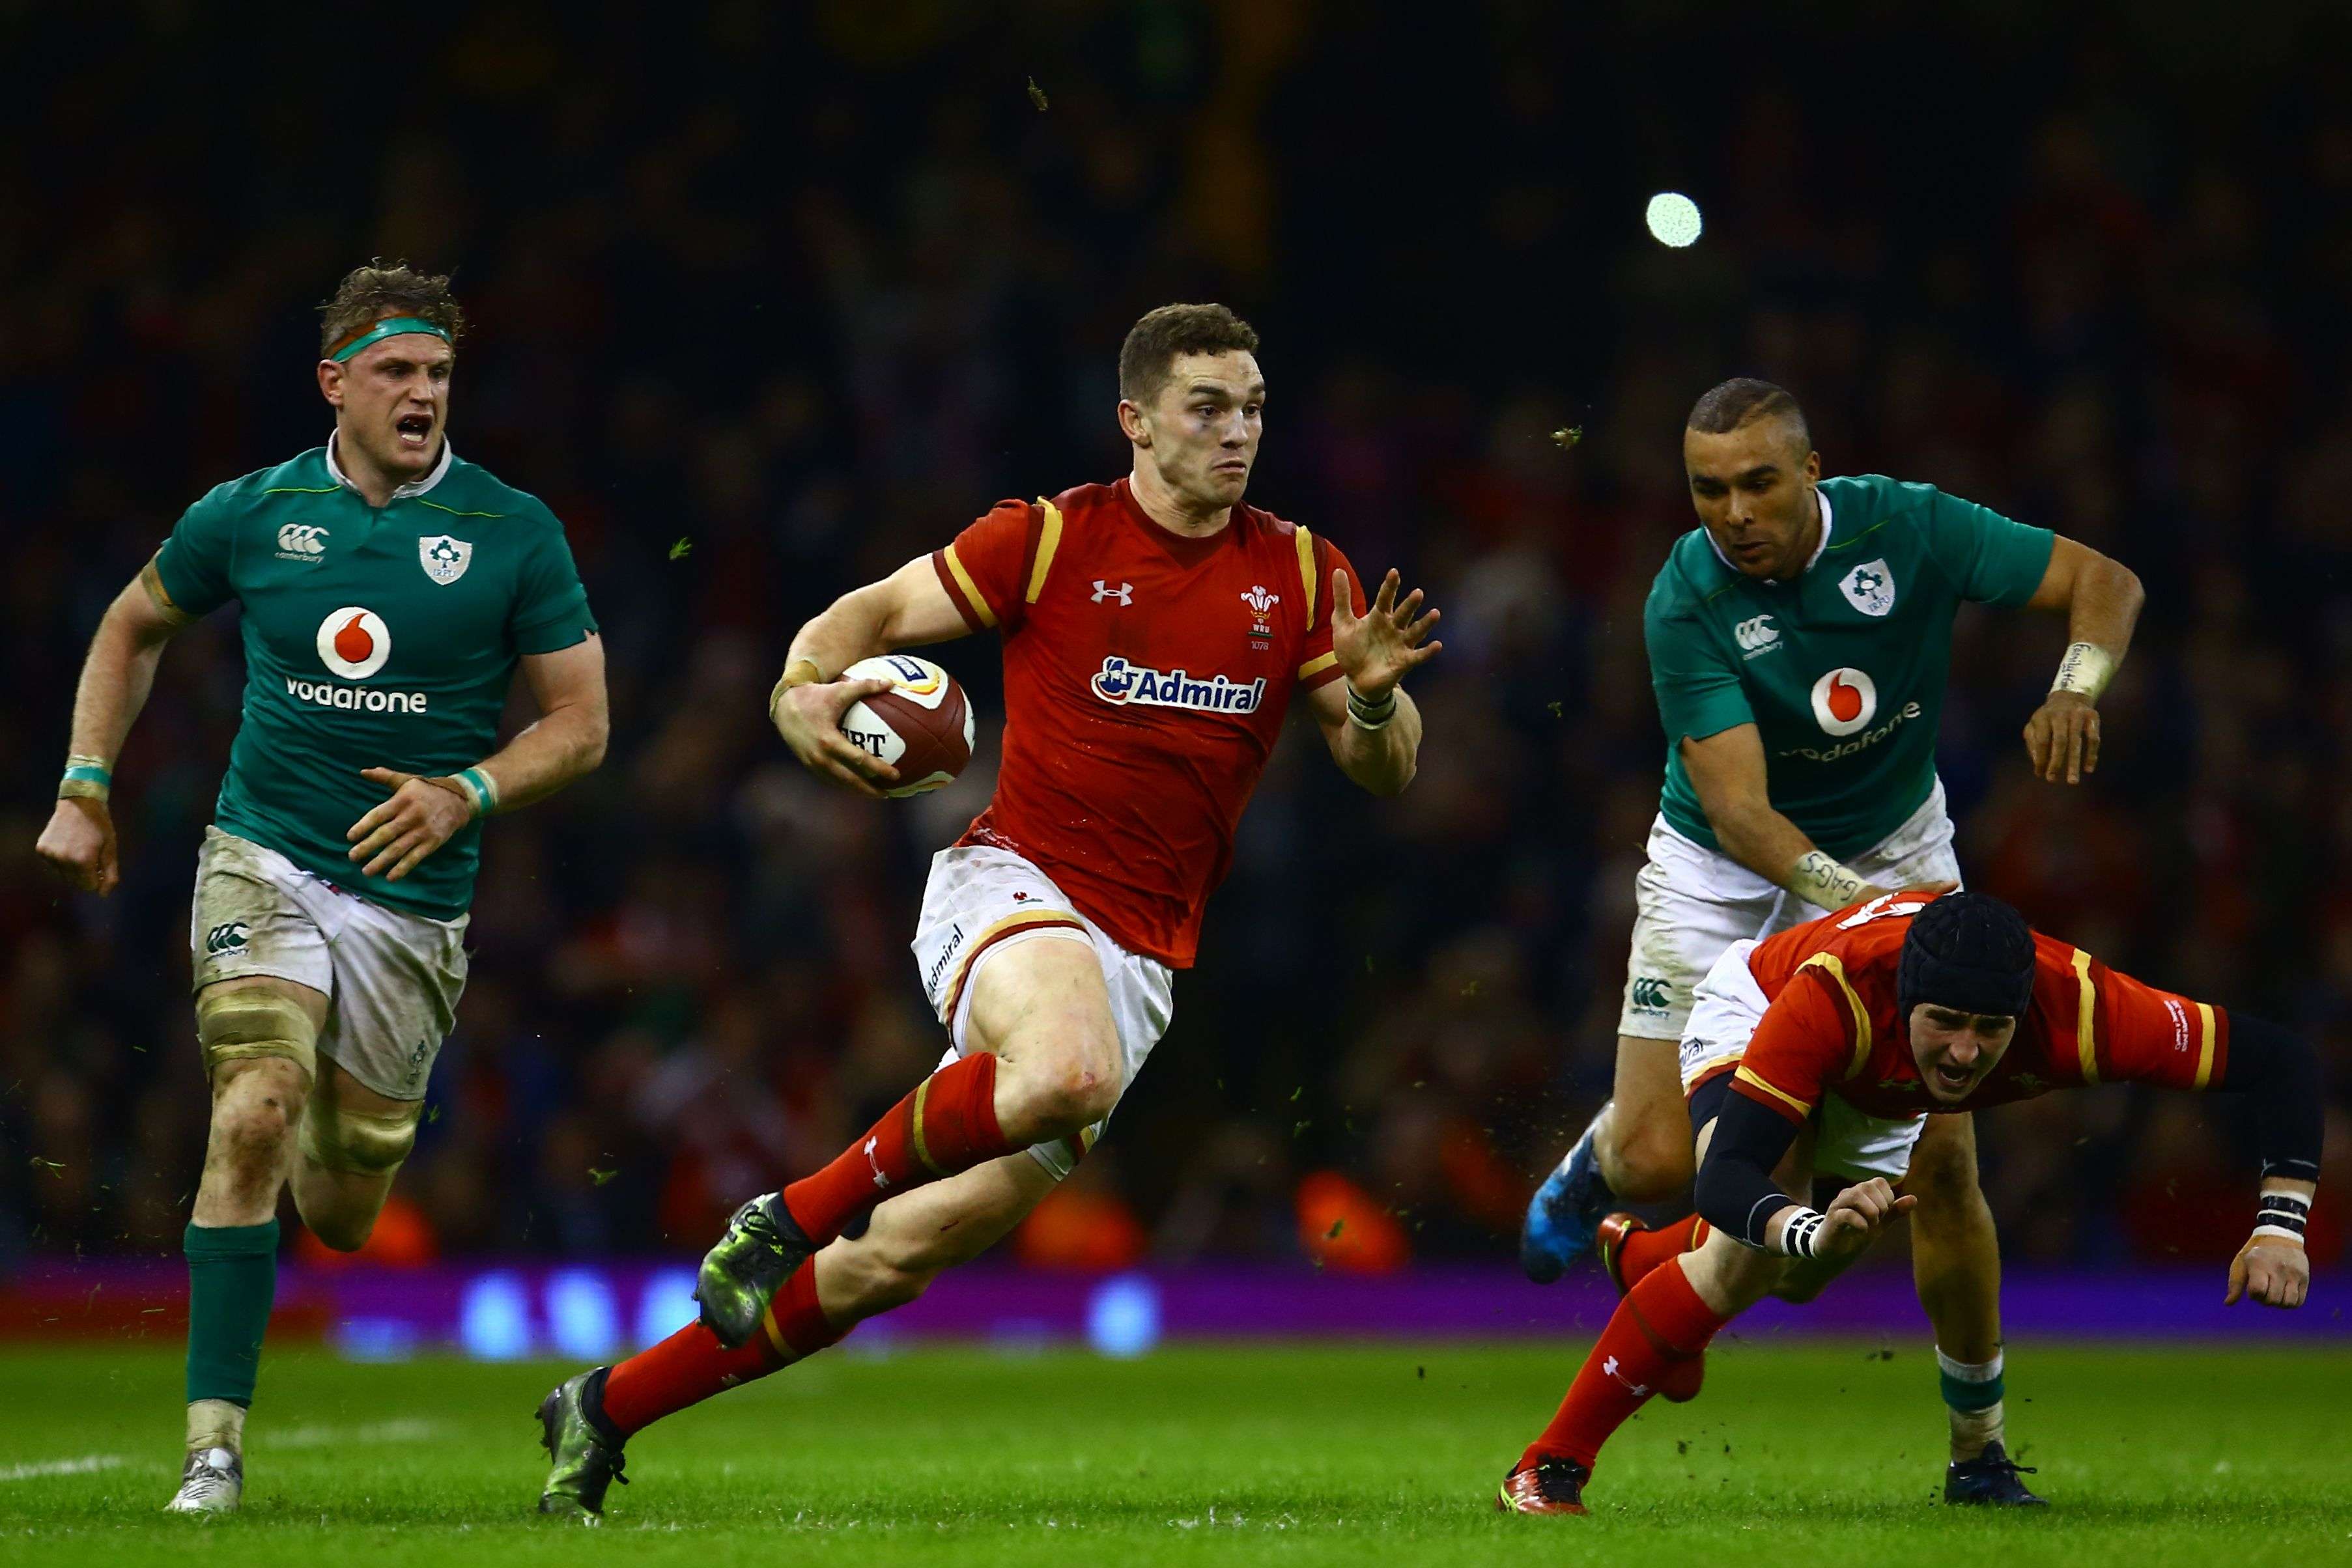 Wales wing George North makes a break against Ireland. Photo: AFP